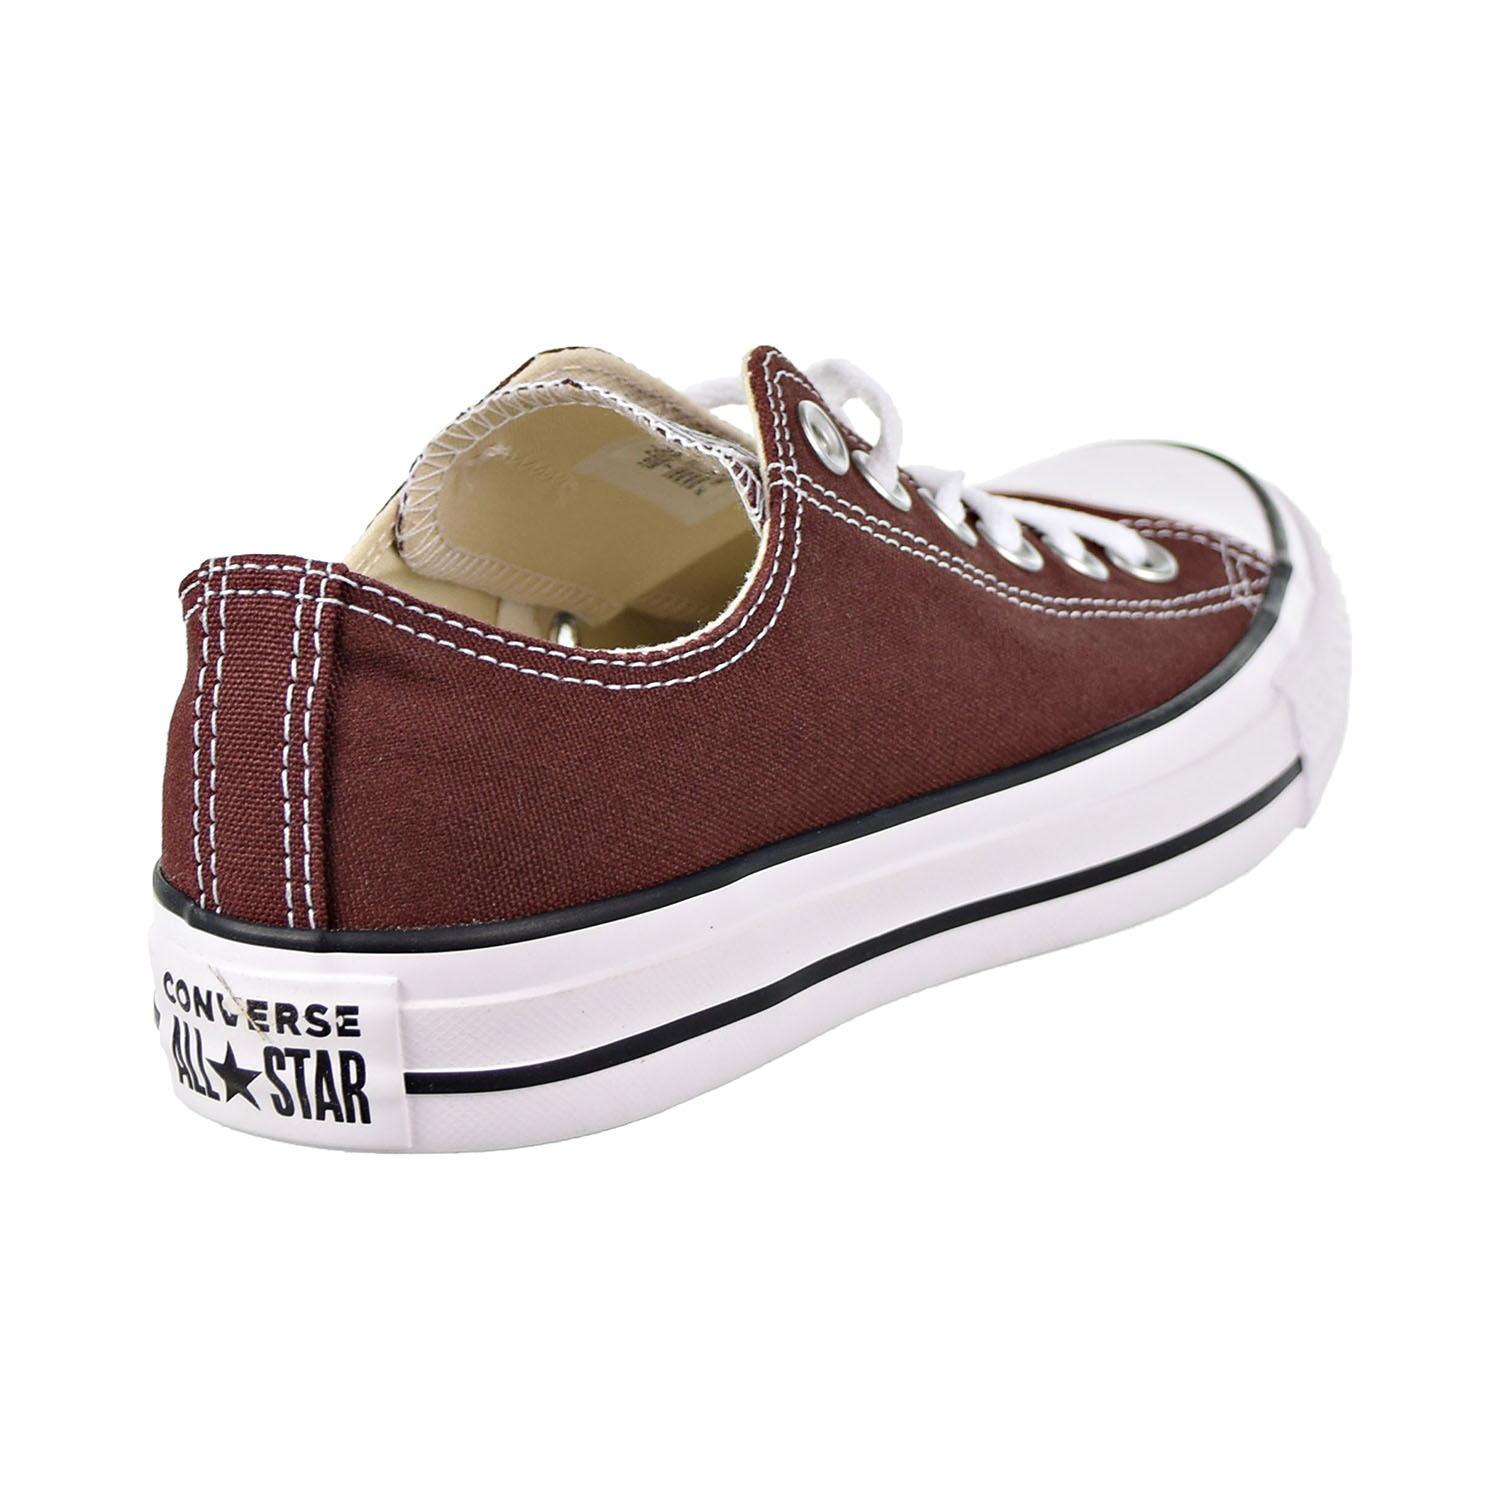 Converse Chuck Taylor All Star Ox Big Kids/Men's Shoes Barkroot Brown 163356f